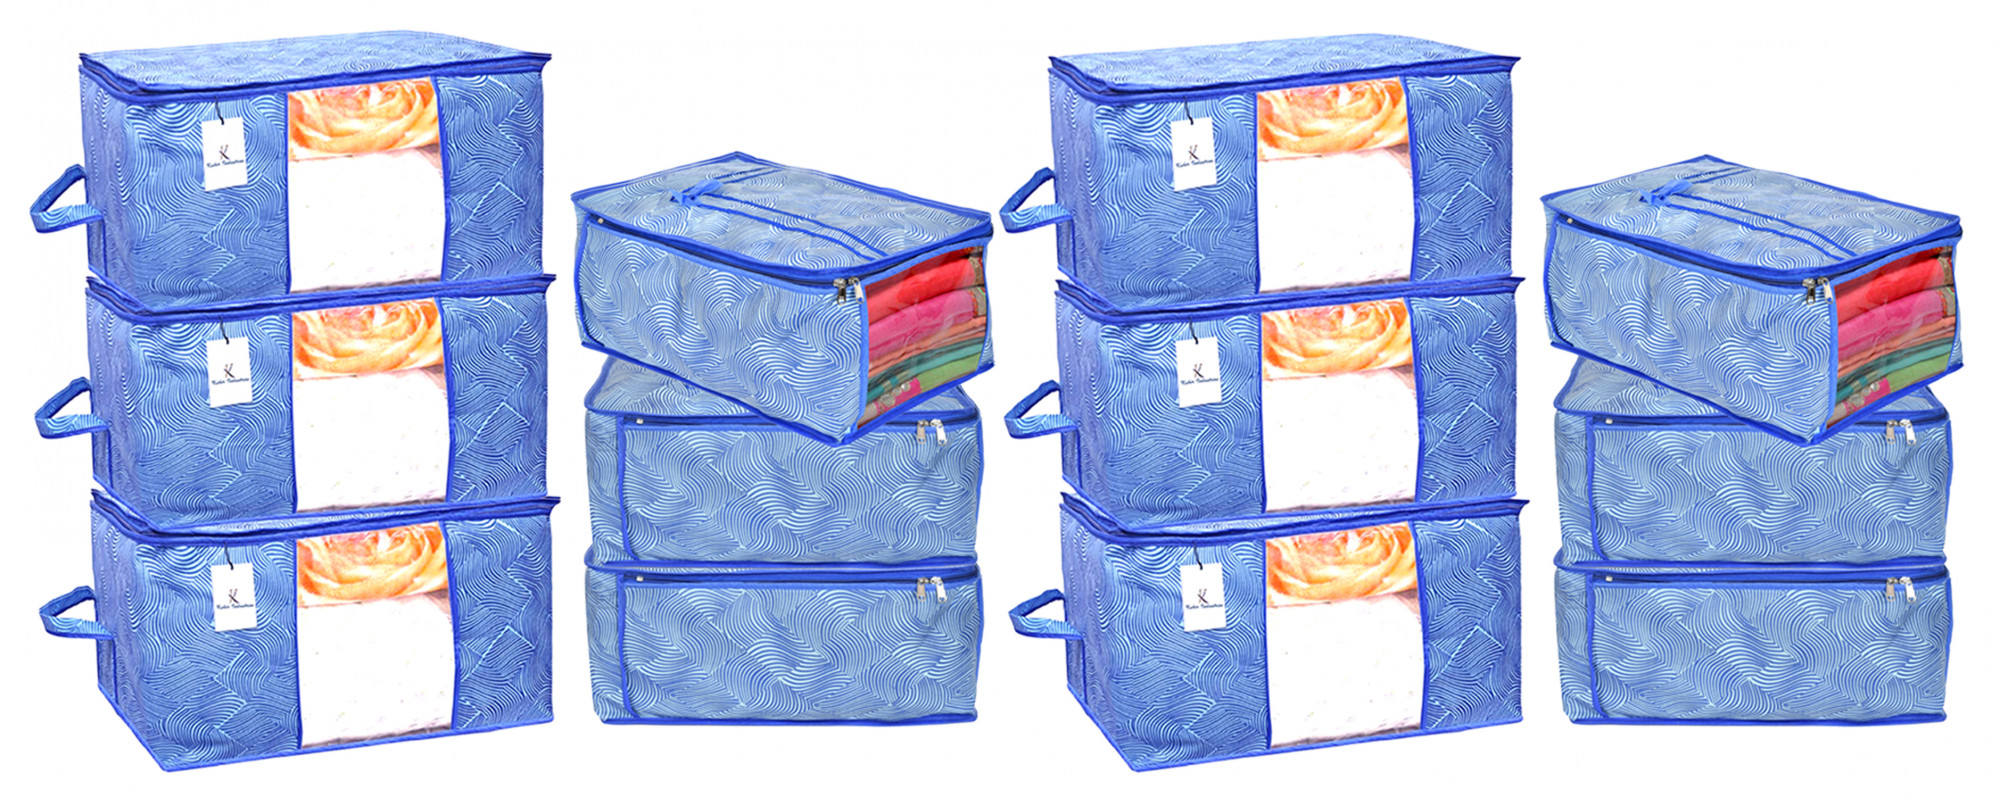 Kuber Industries Metalic Lahariya Print Non Woven Saree Cover And 2 Pieces Underbed Storage Bag, Storage Organiser, Blanket Cover (Blue)